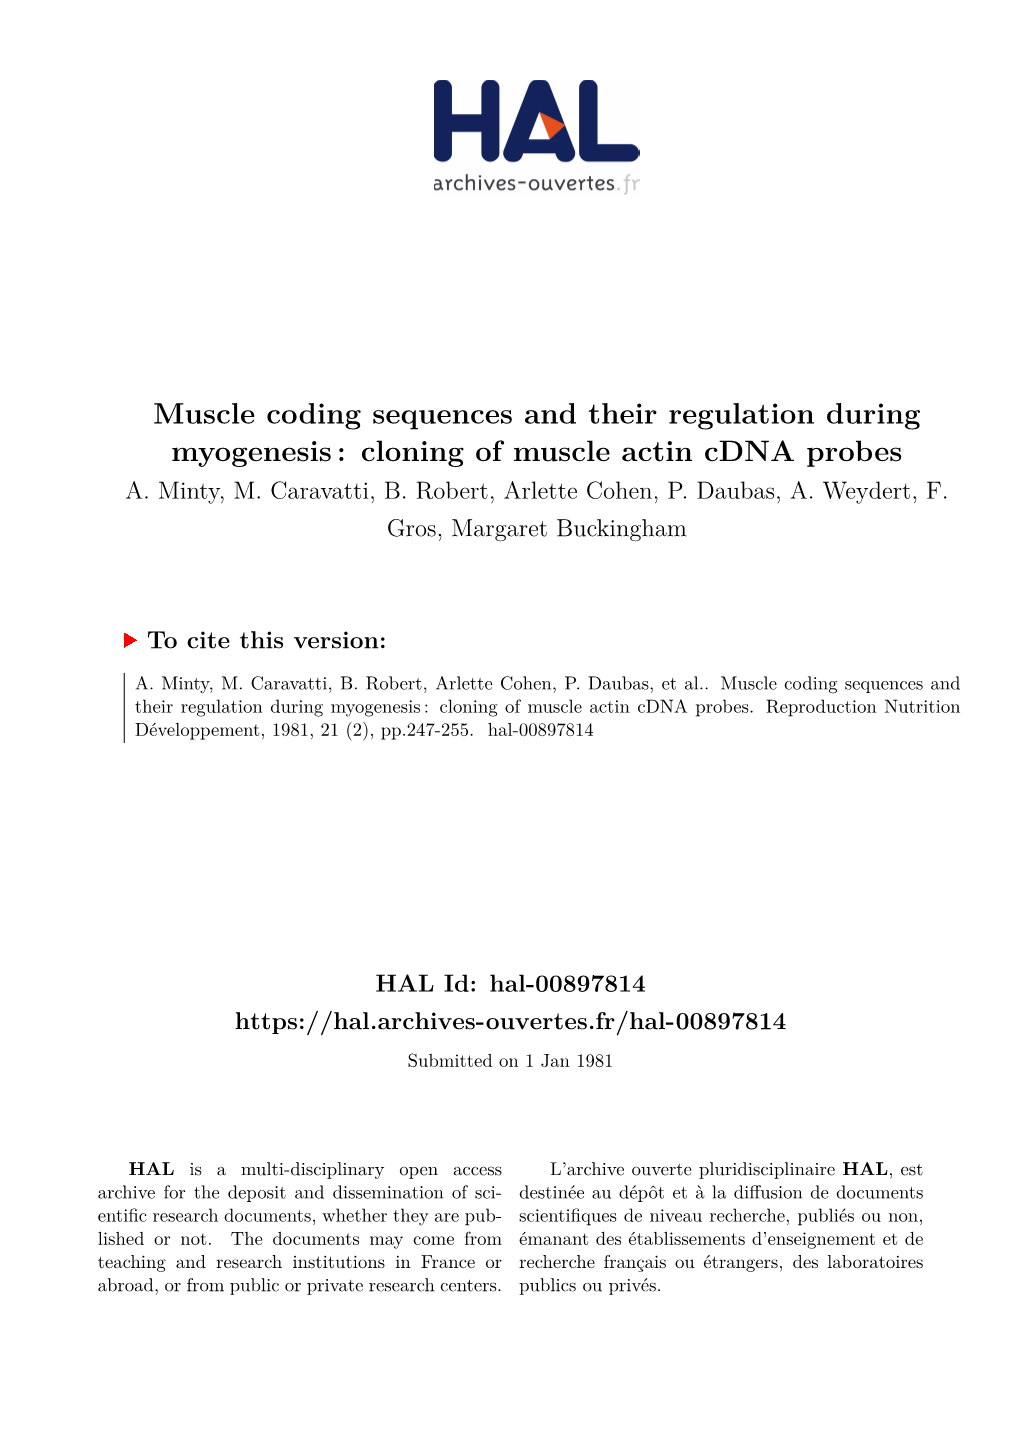 Muscle Coding Sequences and Their Regulation During Myogenesis : Cloning of Muscle Actin Cdna Probes A